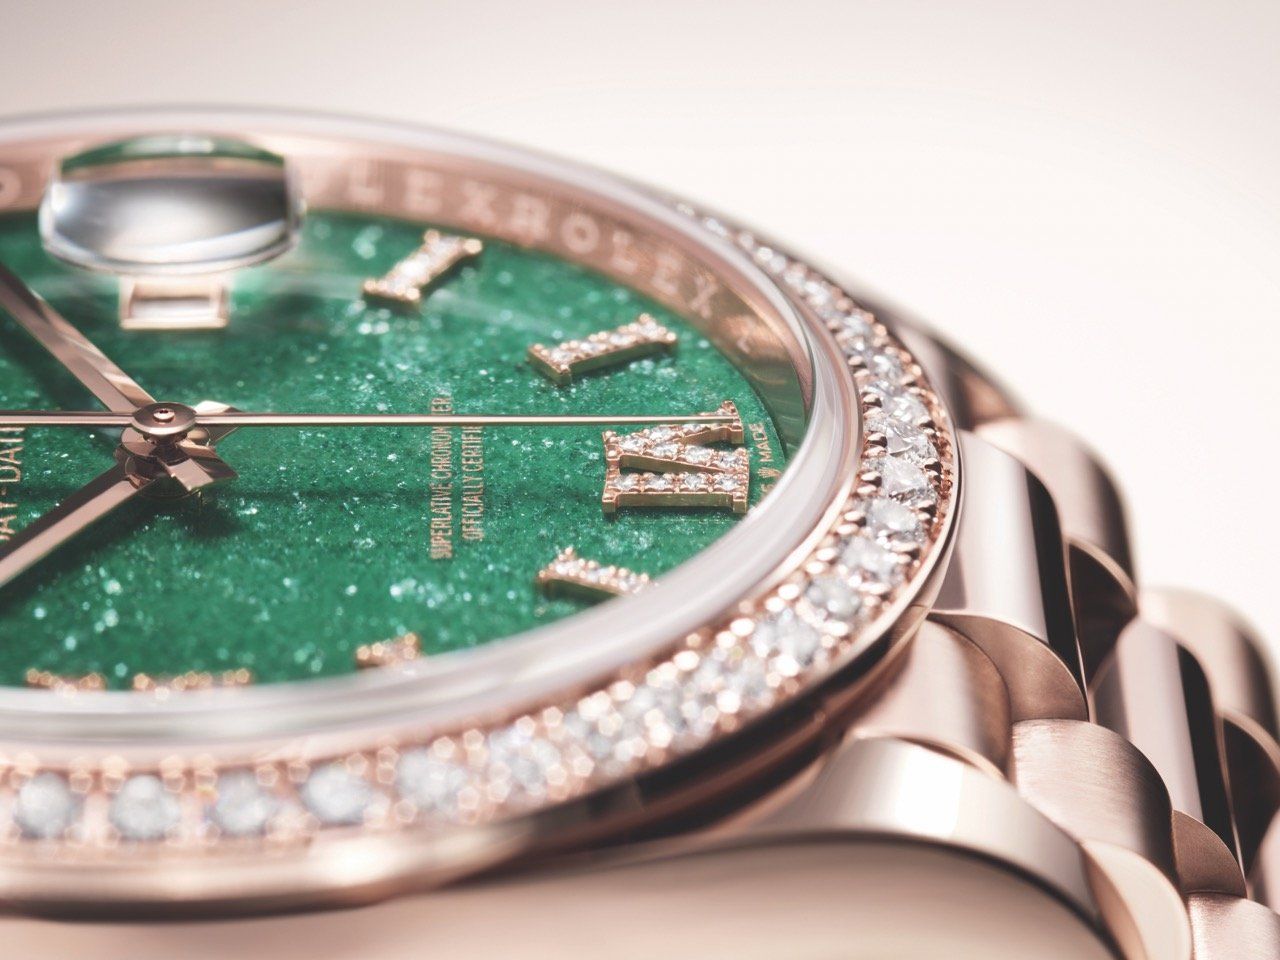 The new Day-Date 36 models mark the continuation of a Rolex legacy - The popular 1970s stone dials